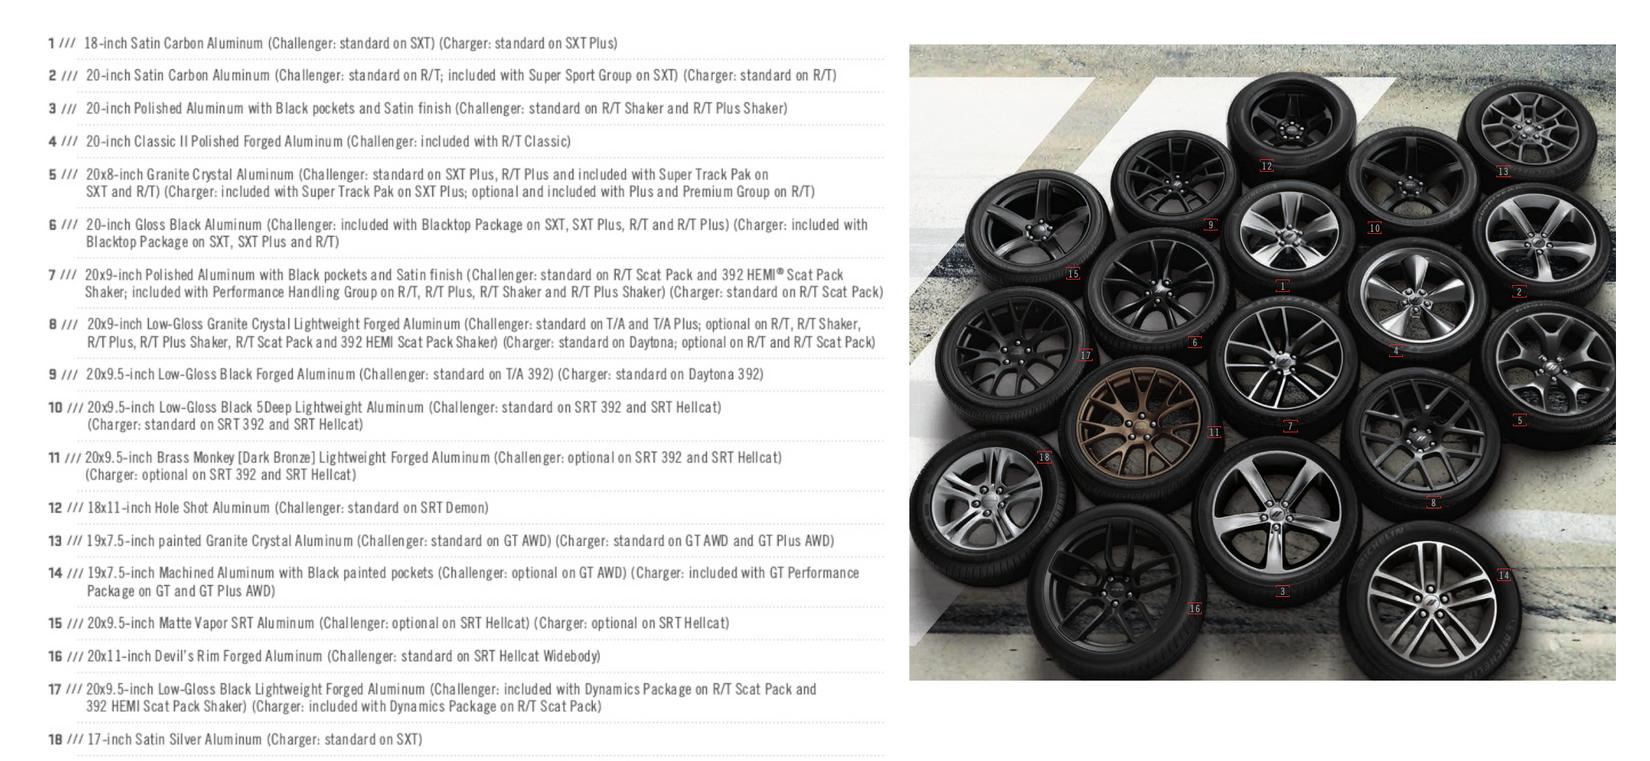 2018 Dodge Challenger/Charger rim choices